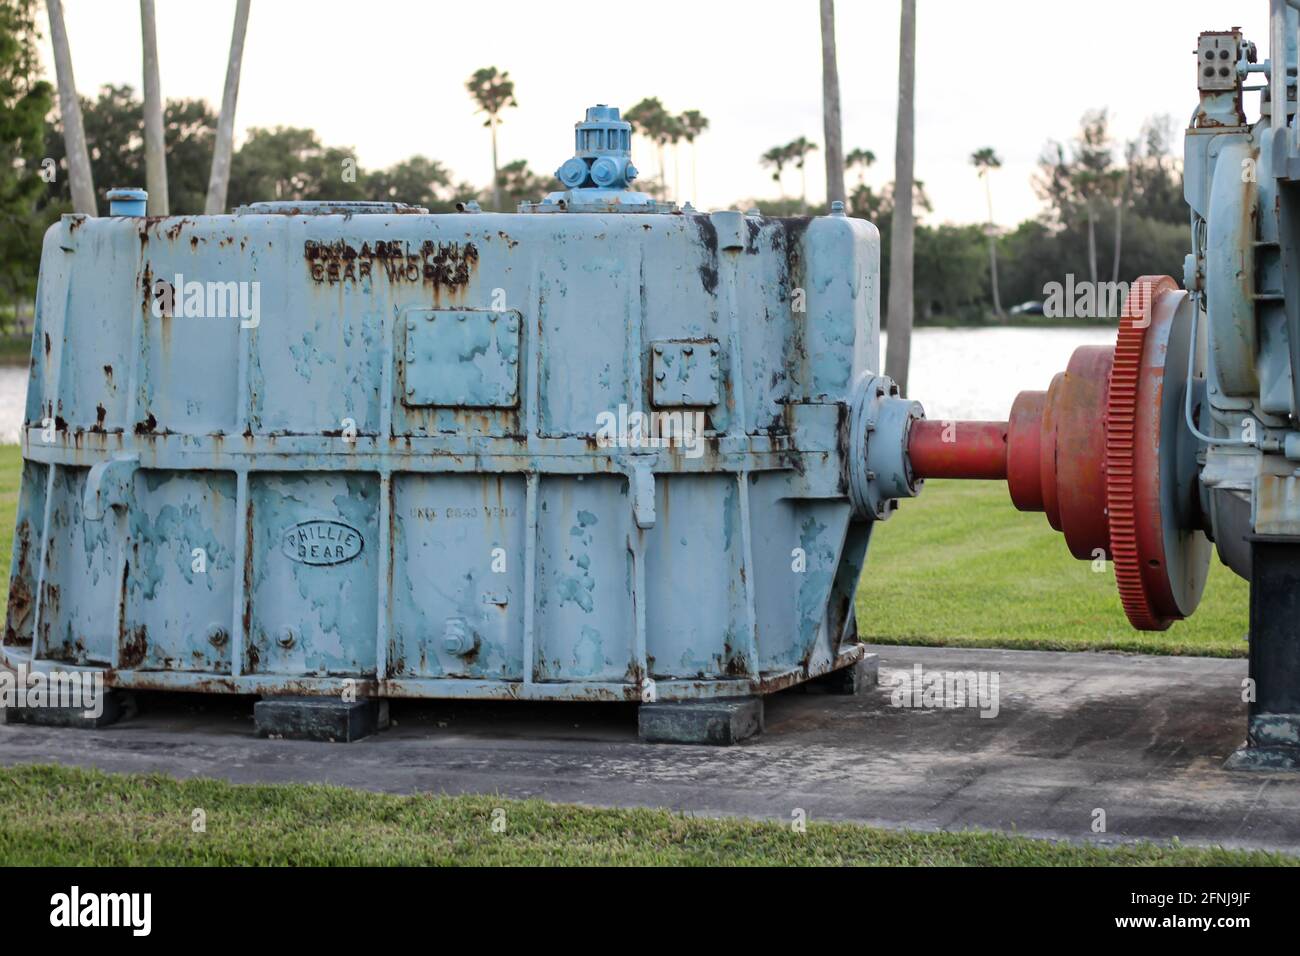 Philadelphia Gear Works machinery. Displayed at site at John Stretch Park. Central power stations and pumping applications for flood control. Stock Photo